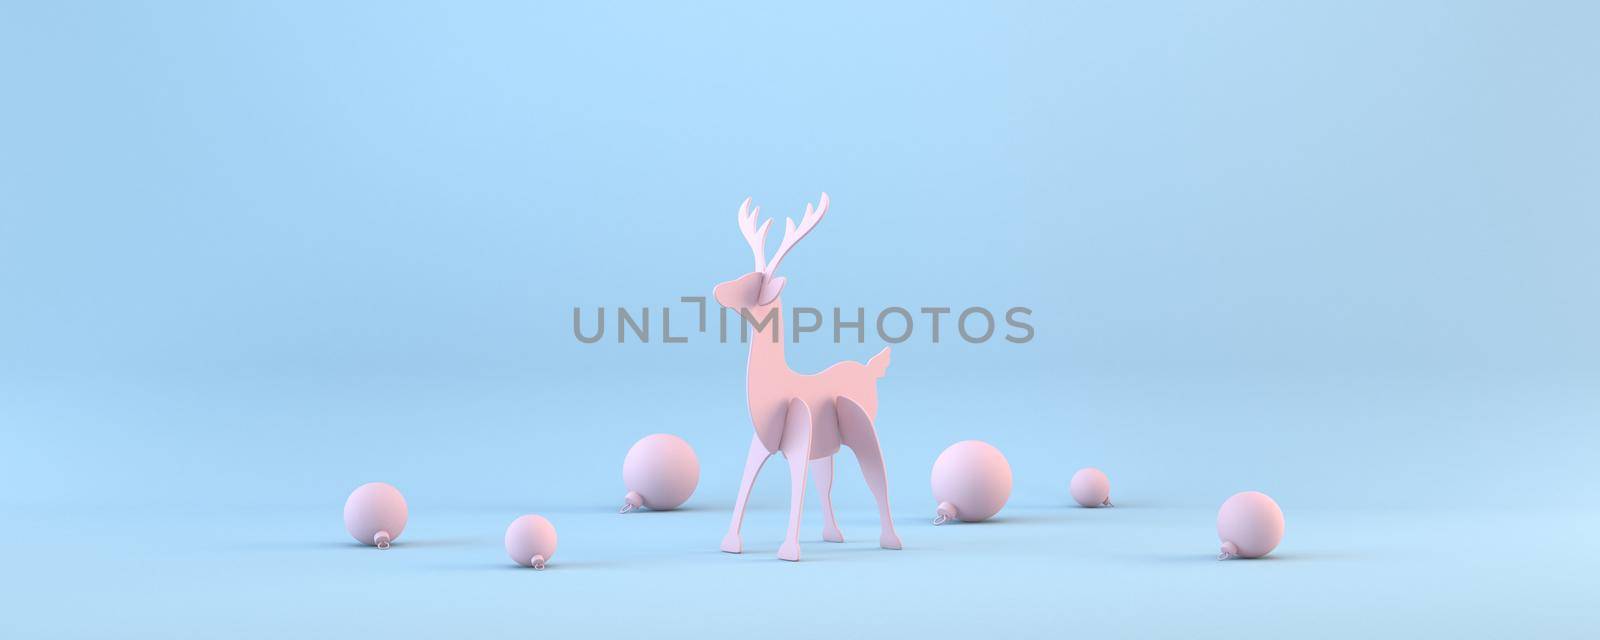 Pink Christmas balls wooden reindeer and 3D rendering illustration isolated on blue background